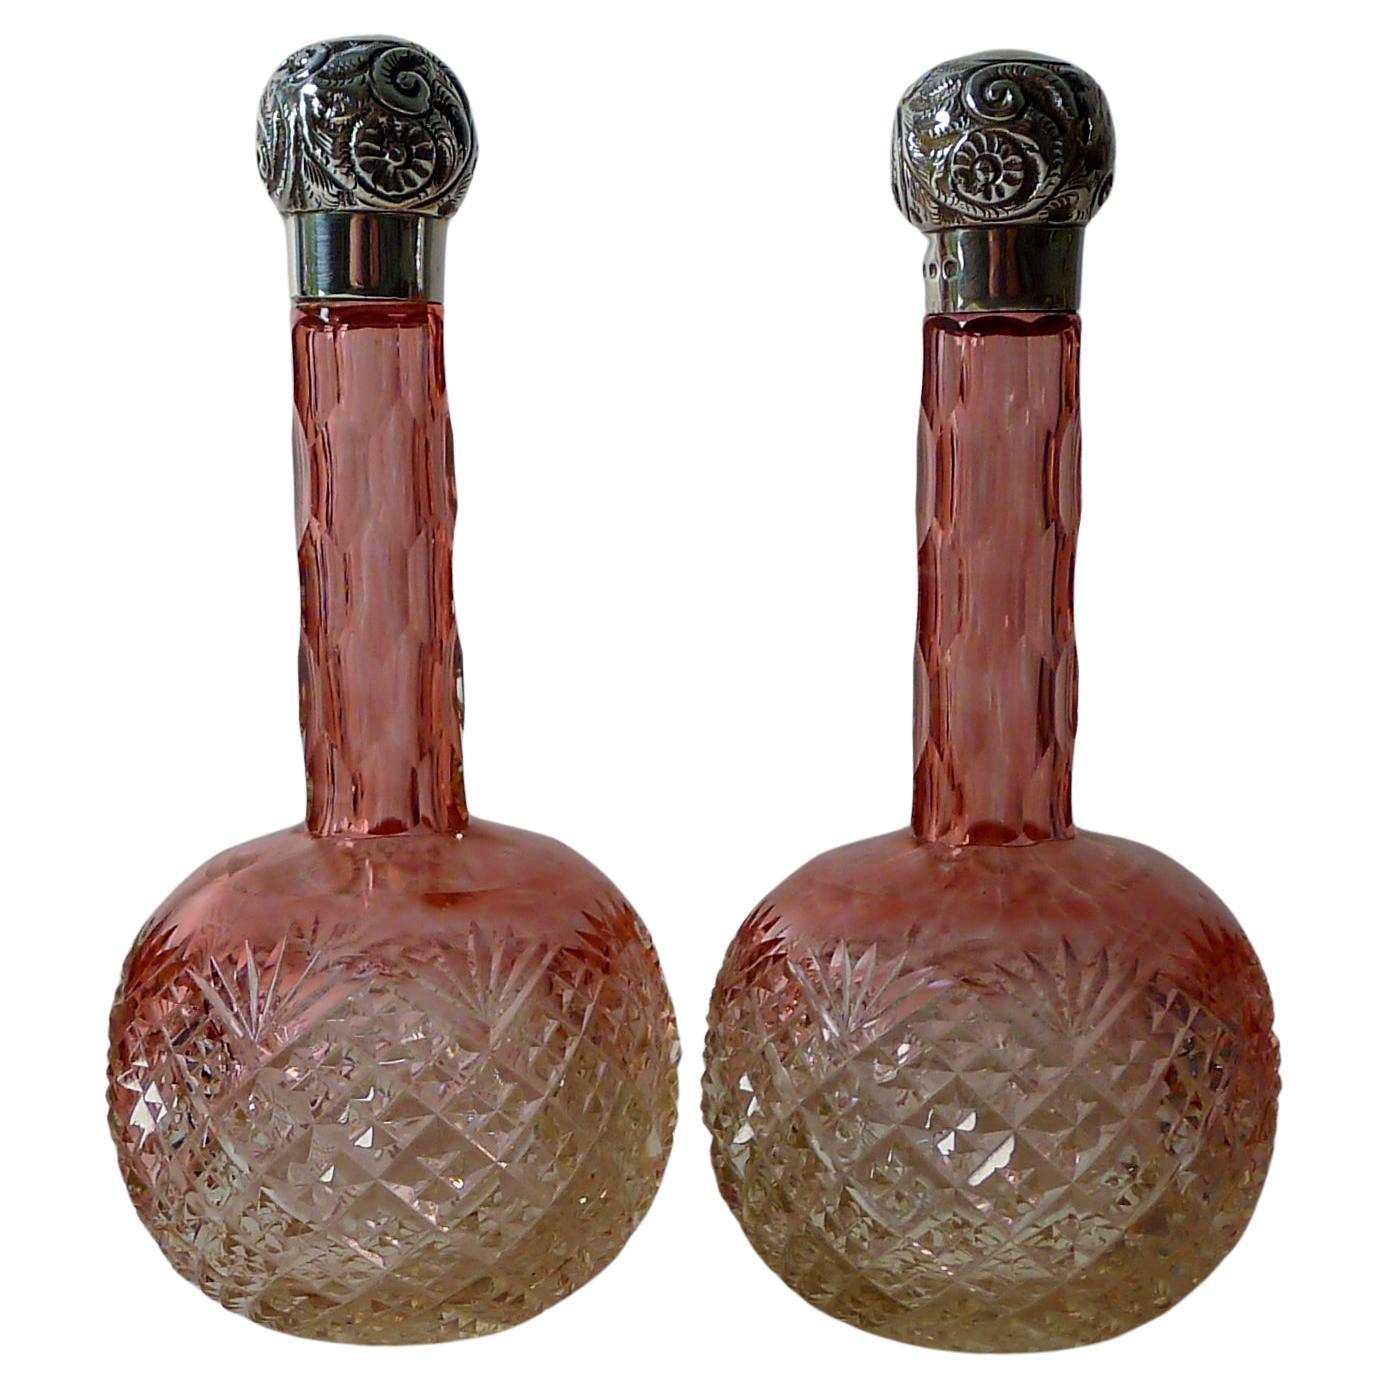 Pair Antique Cut Glass & Solid Silver Perfume Bottles - 1896